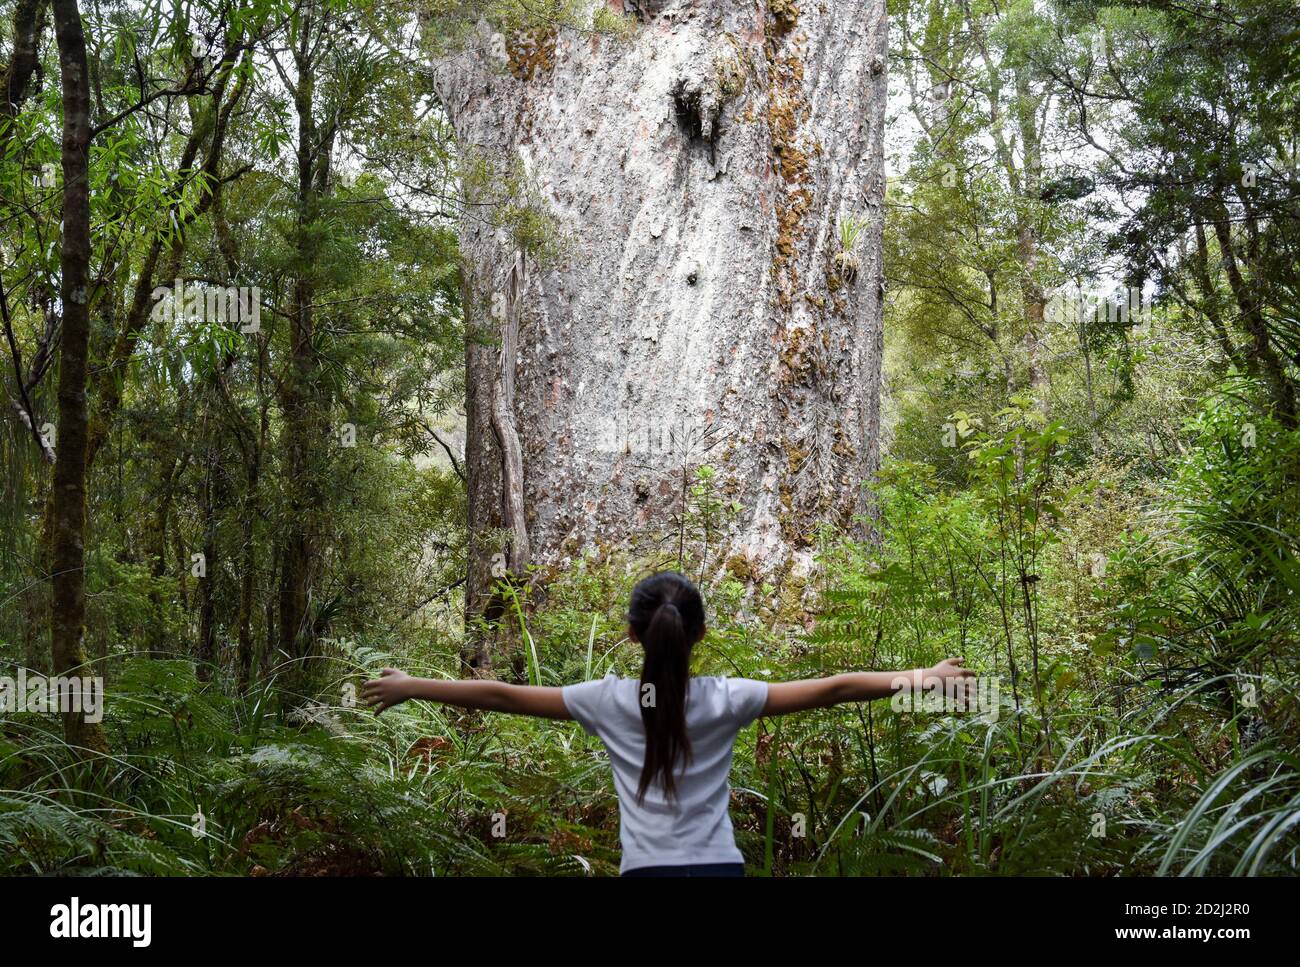 Beijing, New Zealand. 6th Oct, 2020. A tourist views a kauri tree at Waipoua forest in Northland, New Zealand, Oct. 6, 2020. Waipoua, and the adjoining forests, make up the largest remaining tract of native forest in Northland as well as the home to the kauri trees. Credit: Guo Lei/Xinhua/Alamy Live News Stock Photo